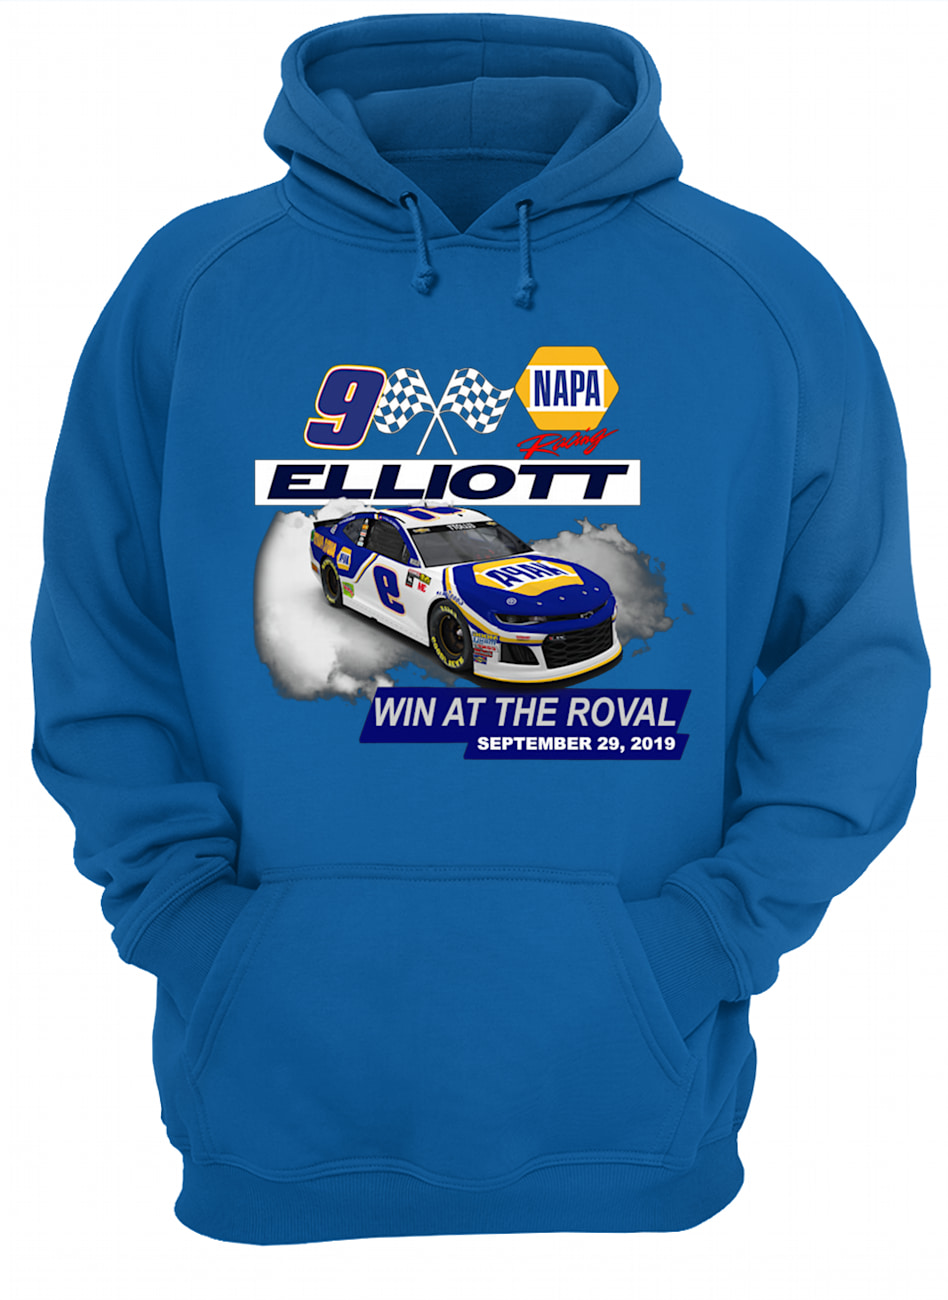 Napa chase elliott no 9 team win at the roval september 29 2019 hoodie